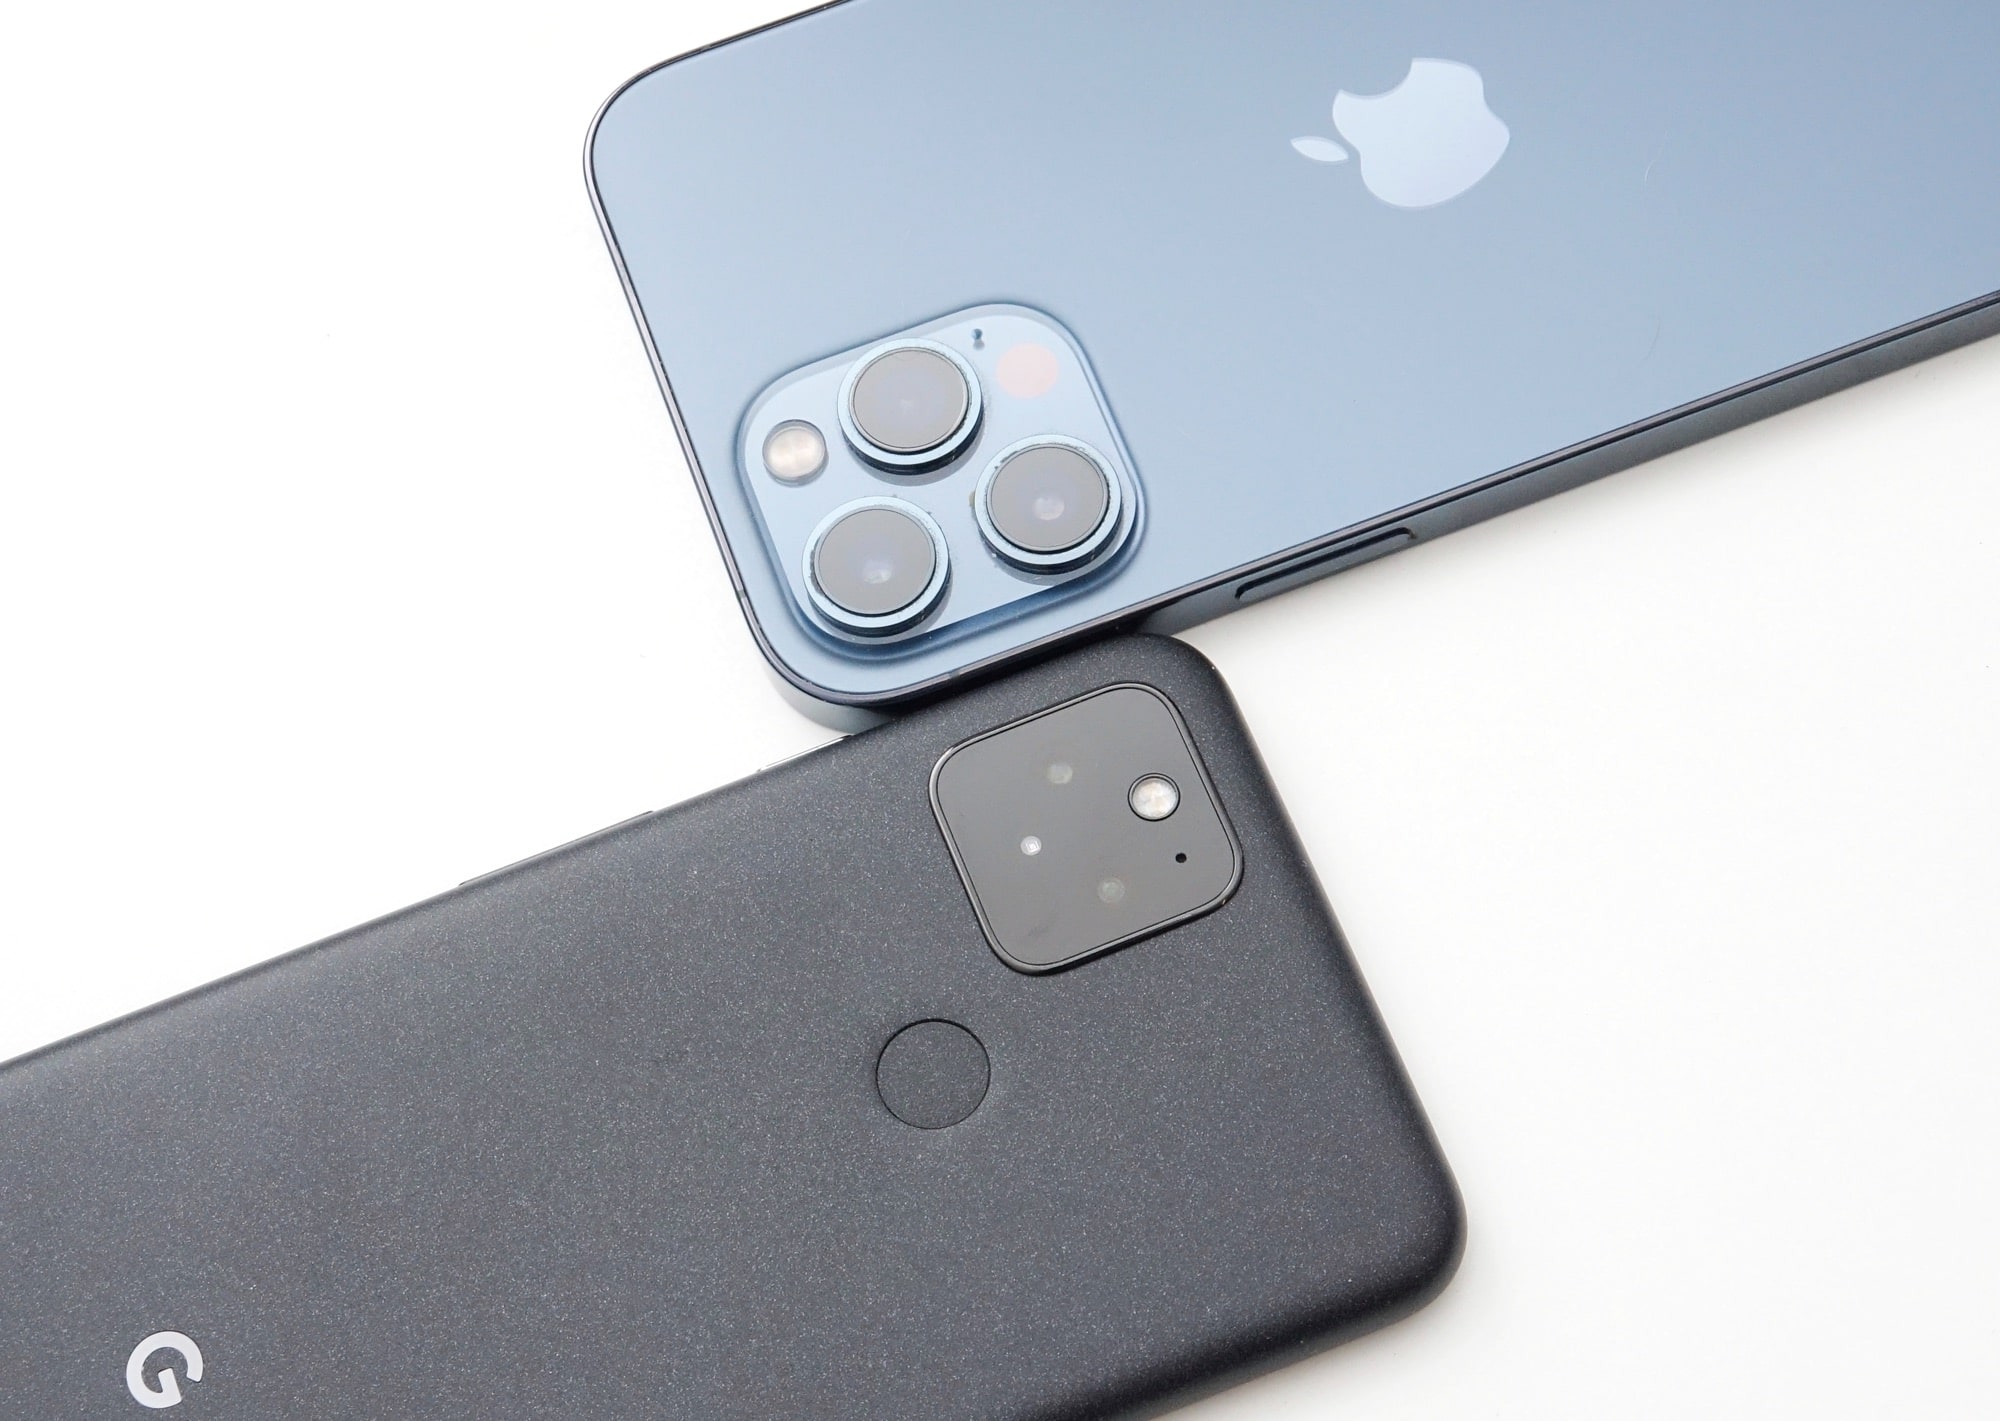 Head to head: the Google Pixel 5 (left) vs the Apple iPhone 12 Pro Max (right)